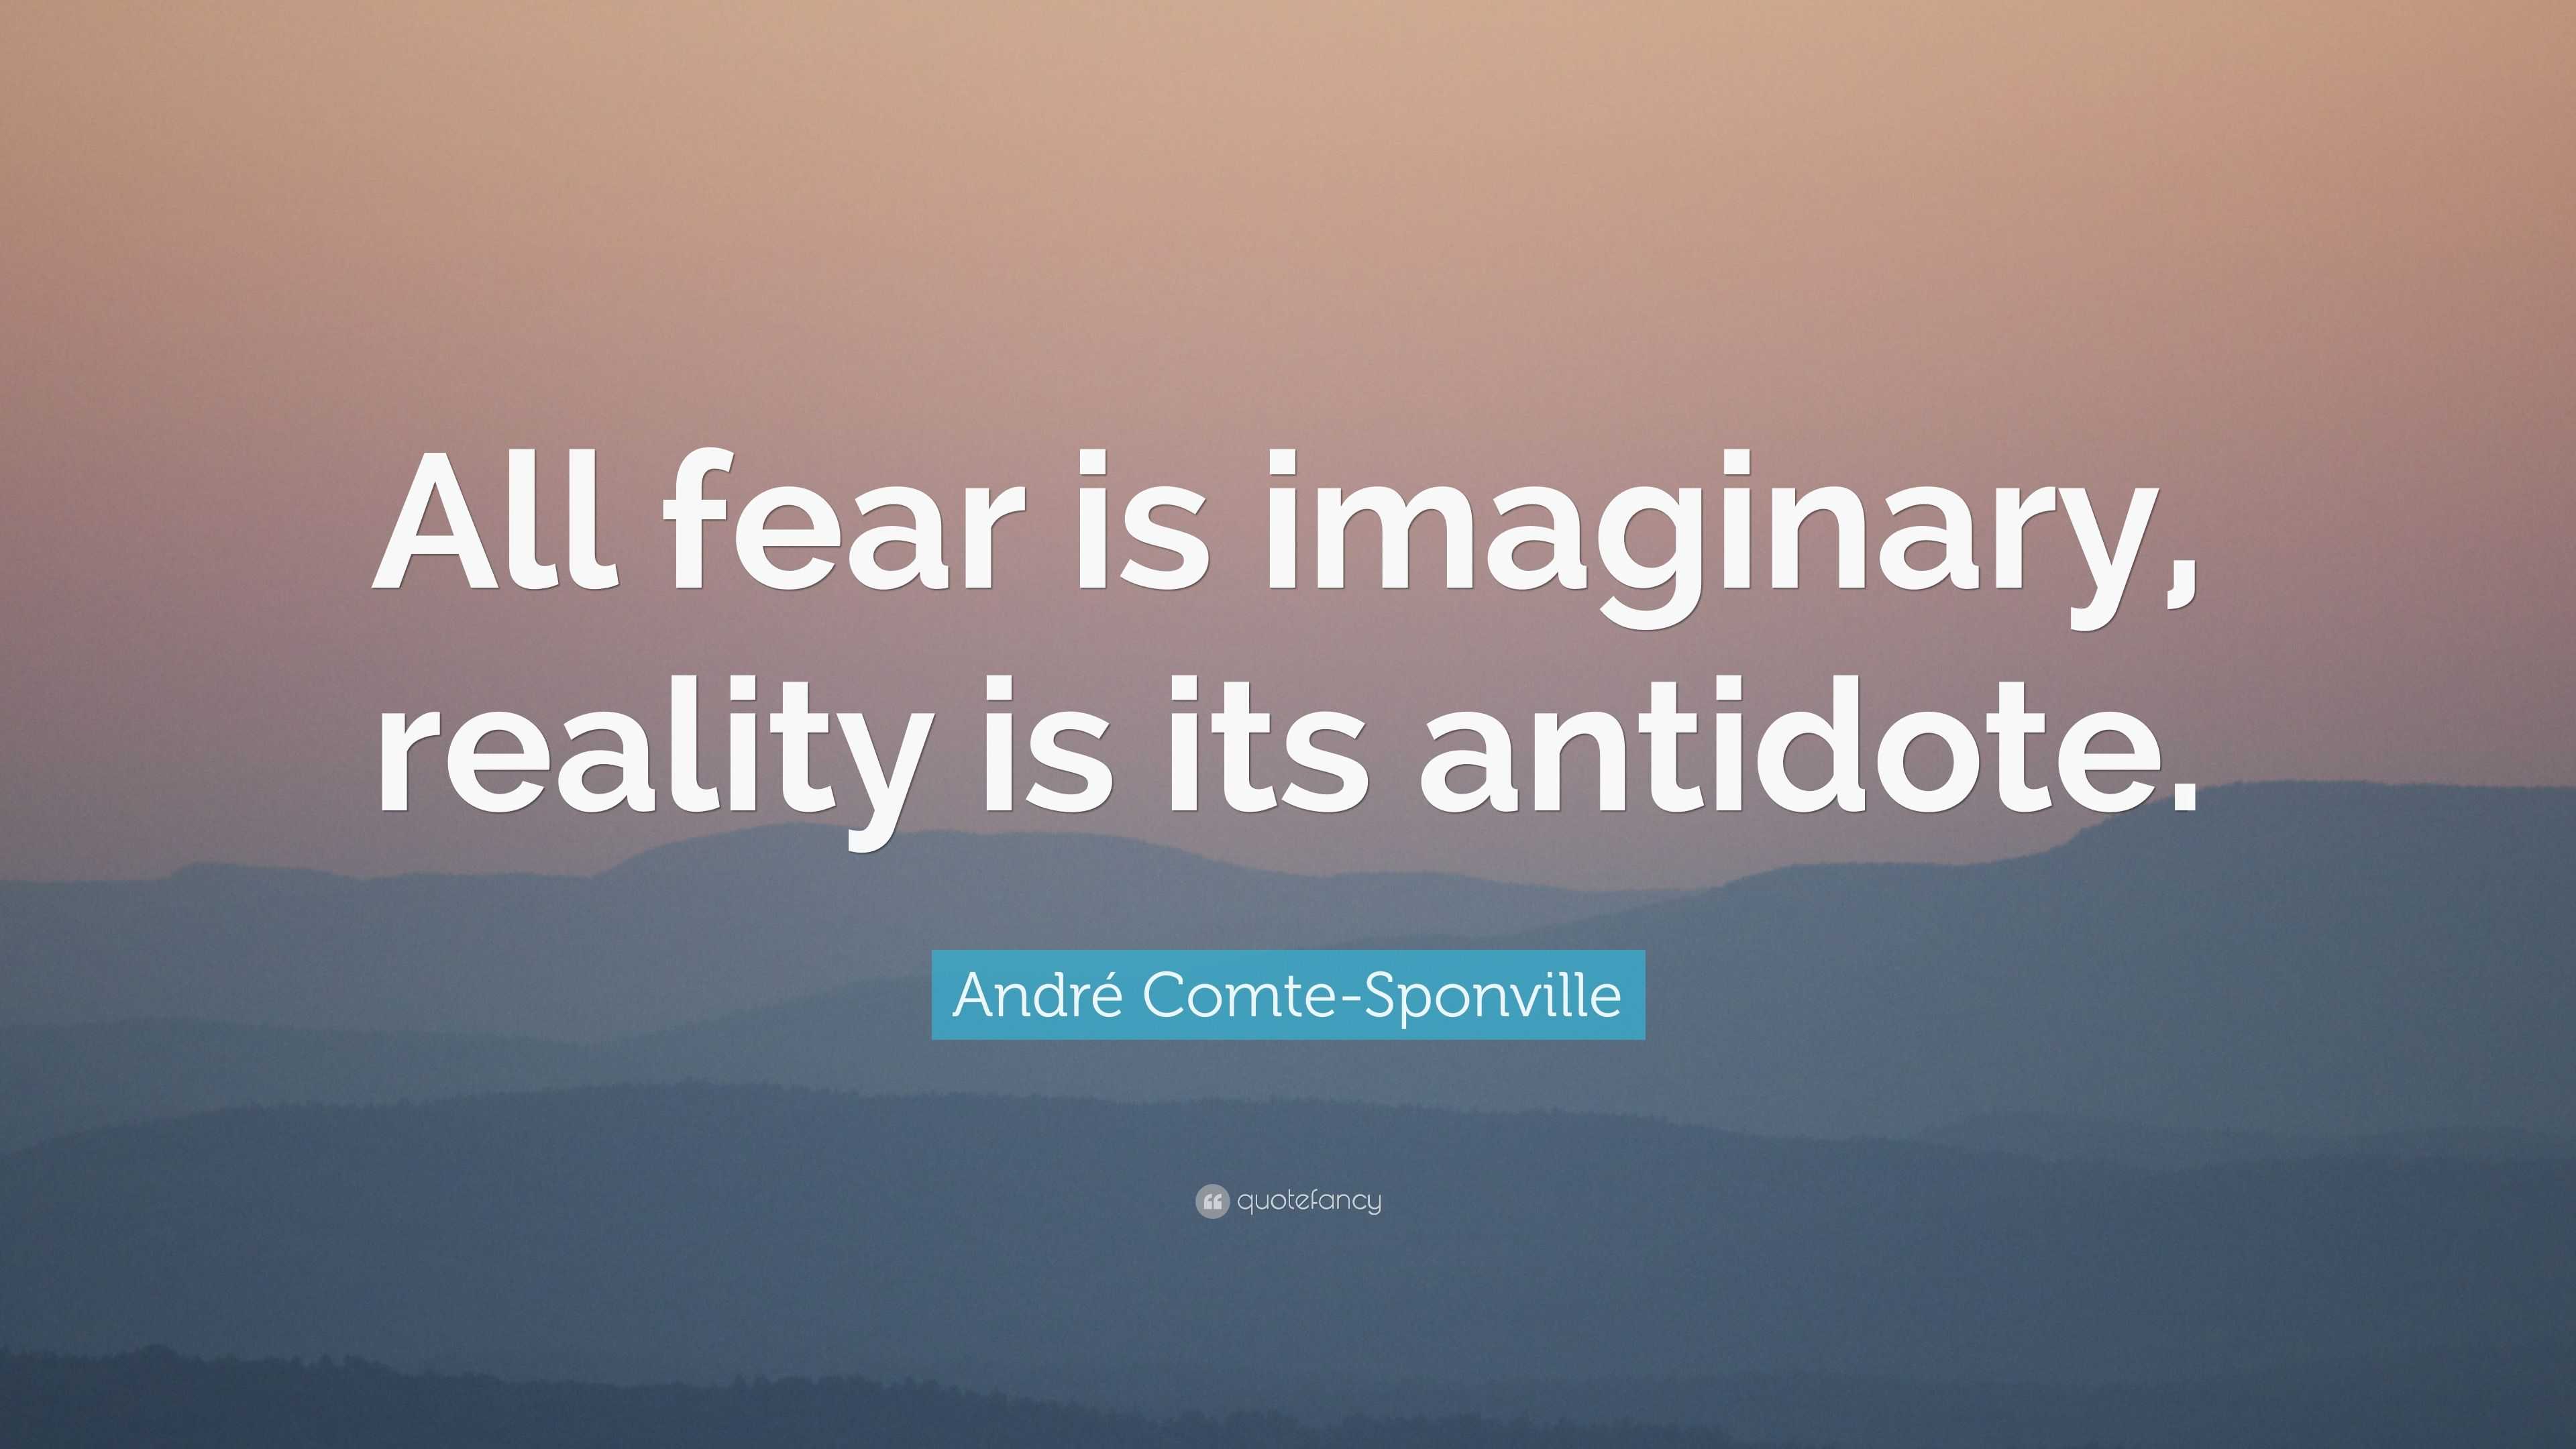 André Comte-Sponville Quote: “All fear is imaginary, reality is its